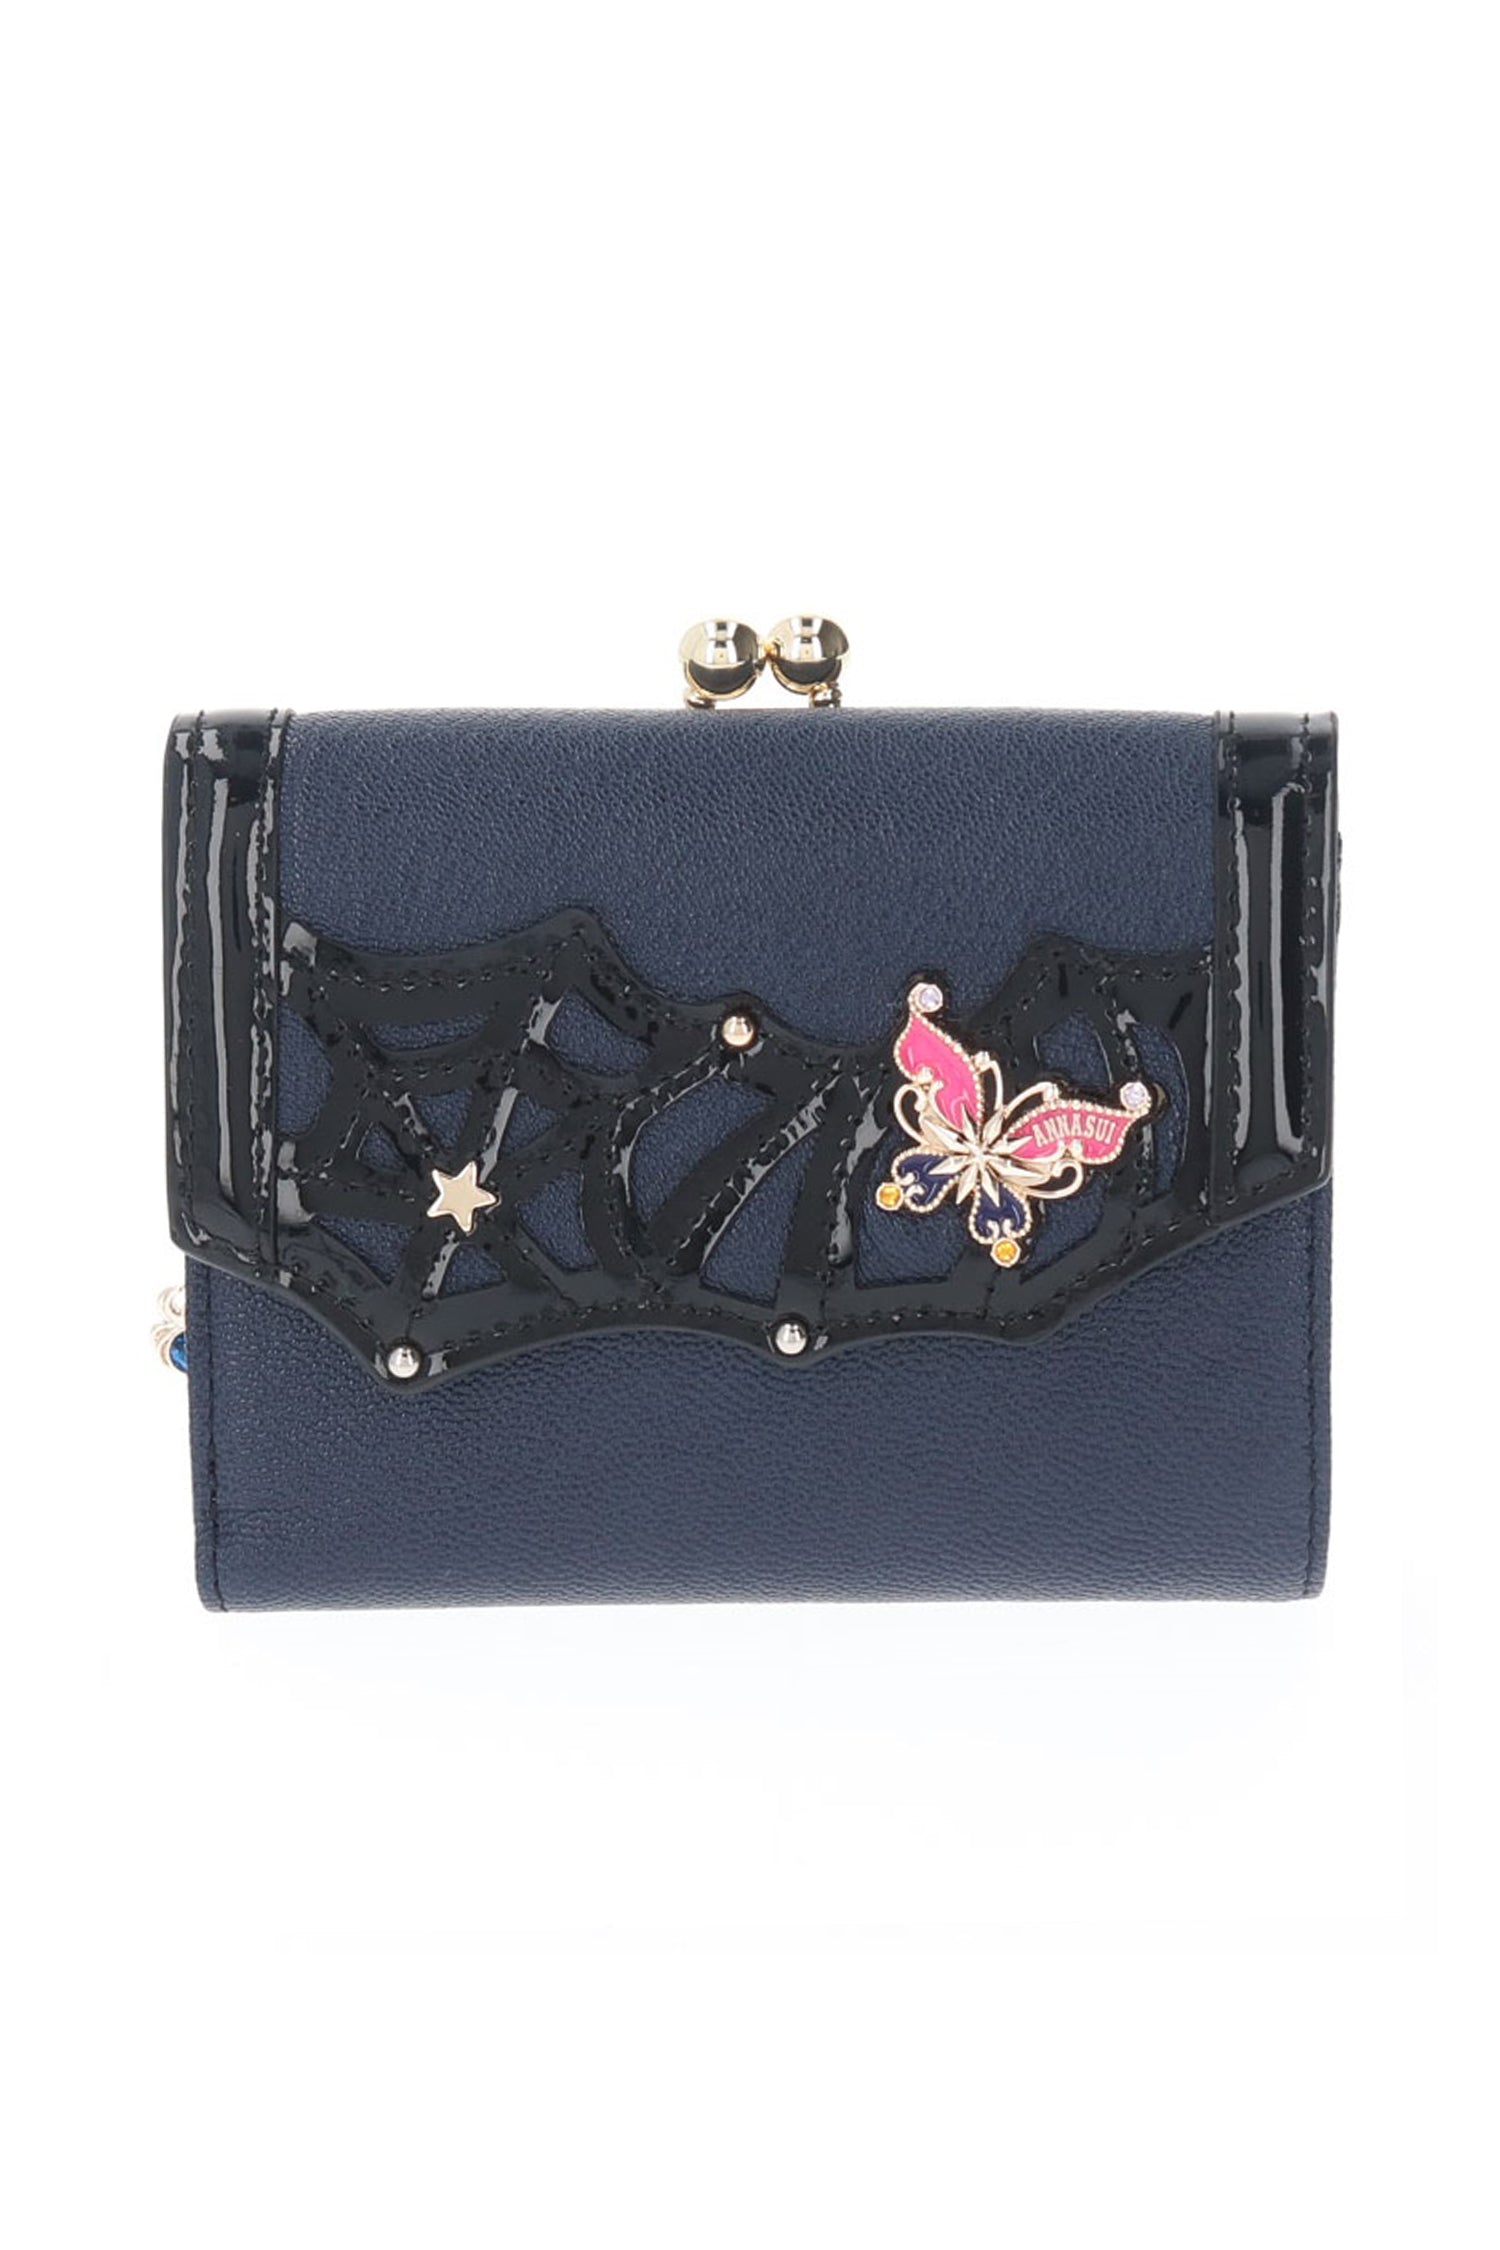 Poison Clasp Bi-fold Wallet Navy with a flap like a black spiderweb with butterfly and a golden star